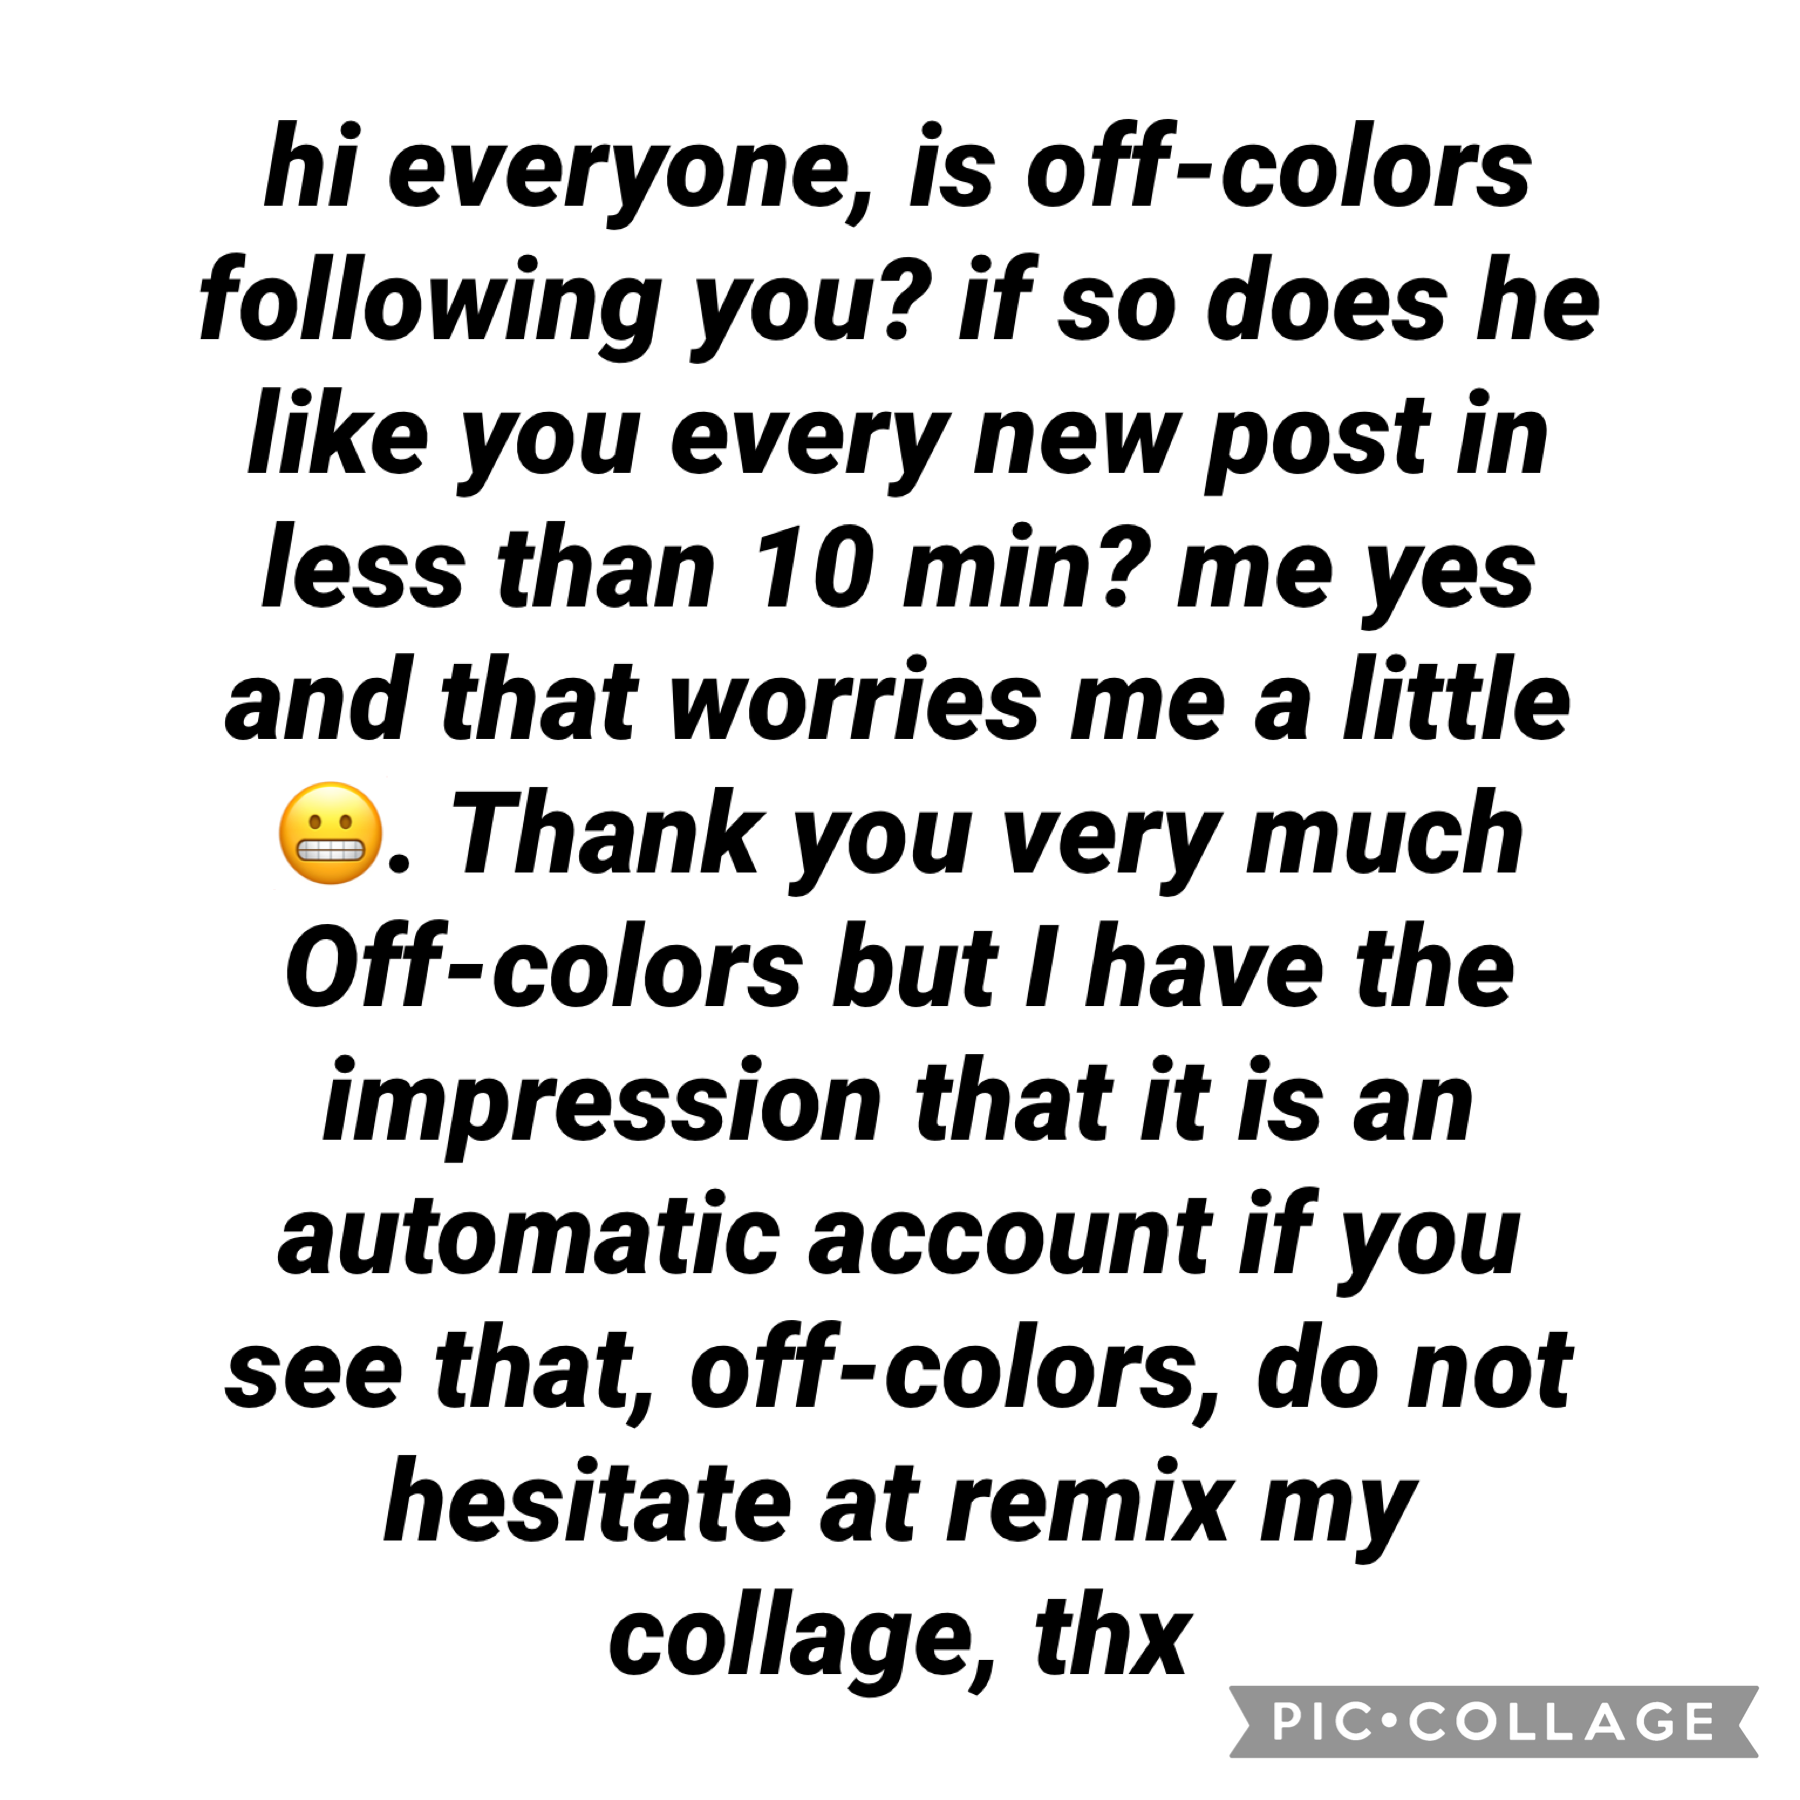 hi everyone, is off-colors following you? if so does he like you every new post in less than 10 min? me yes and that worries me a little 😬. Thank you very much Off-colors but I have the impression that it is an automatic account if you see that, off-color